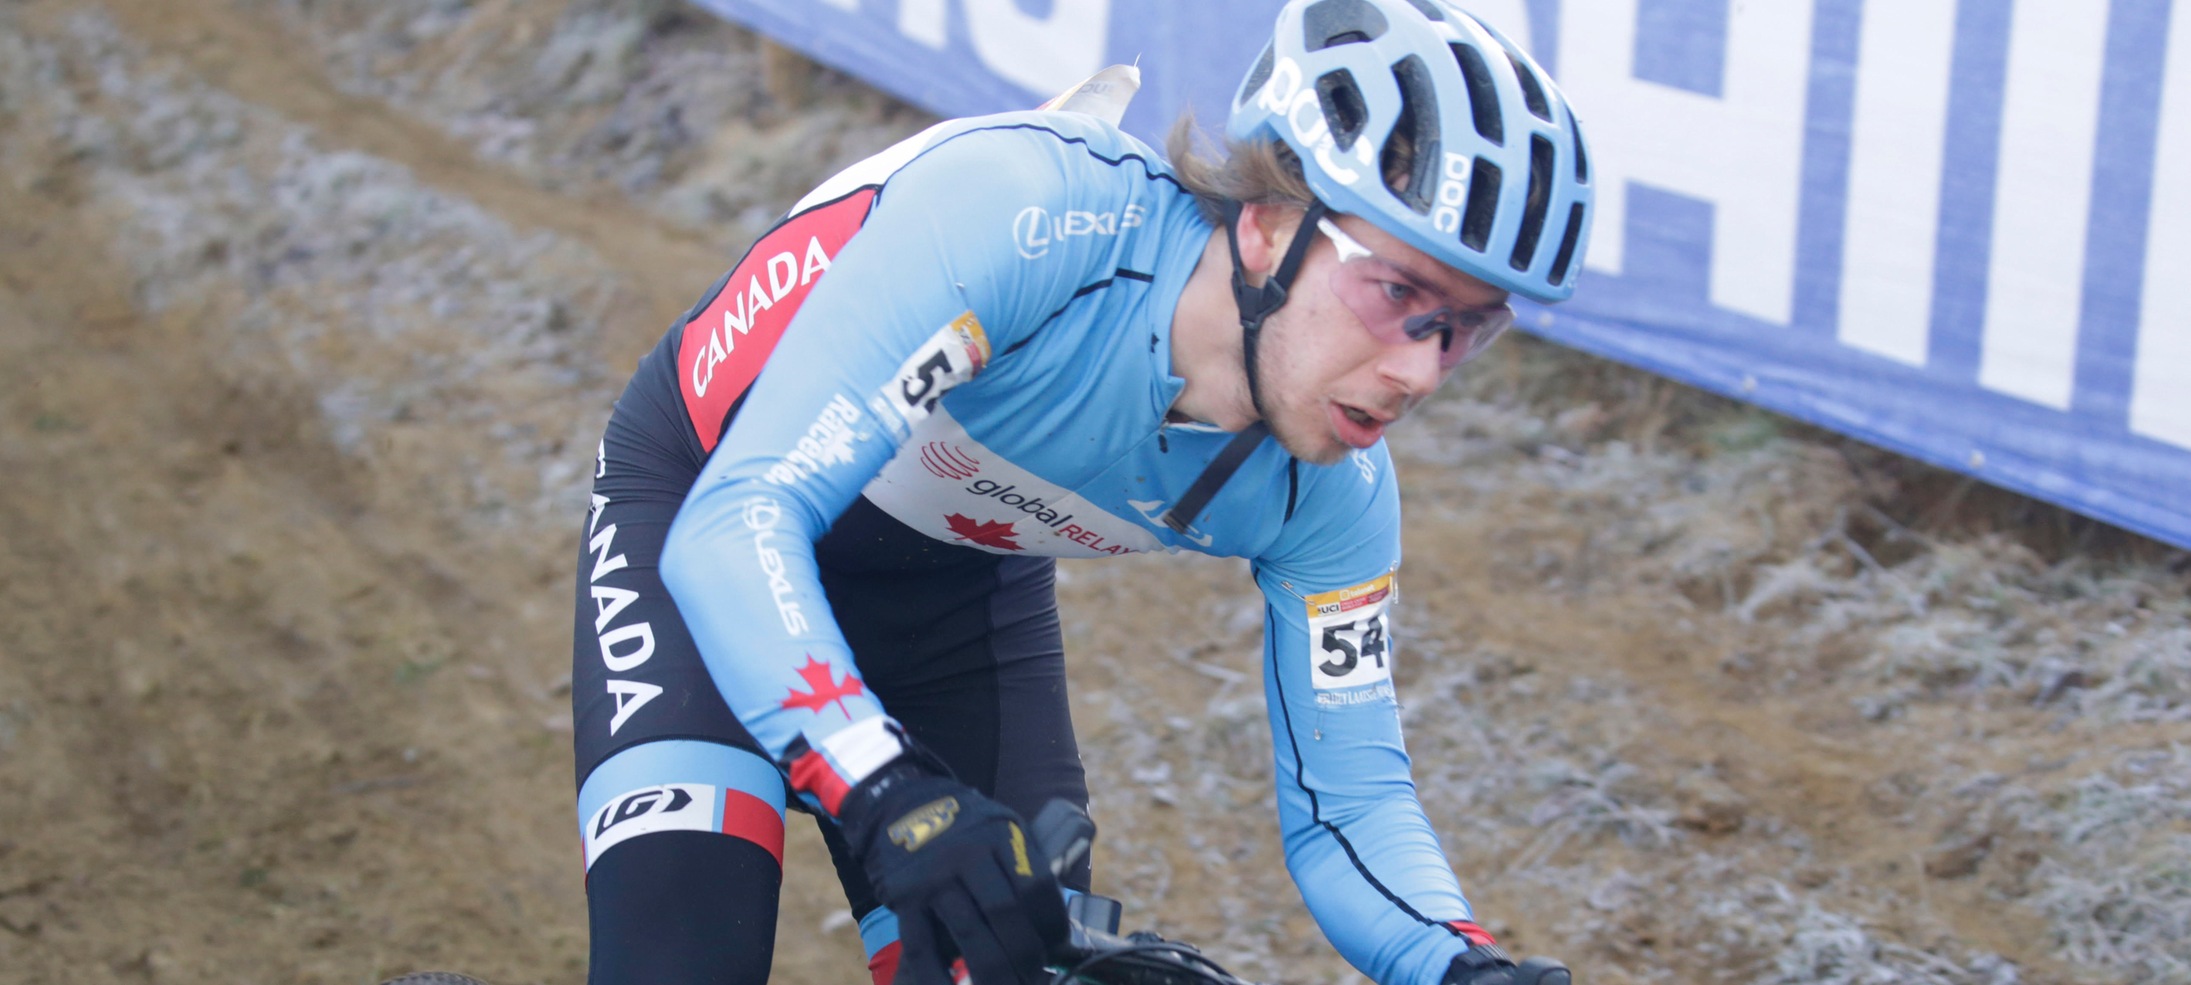 Tyler Orschel of Brevard College to Represent Canada at World Cyclocross Championships